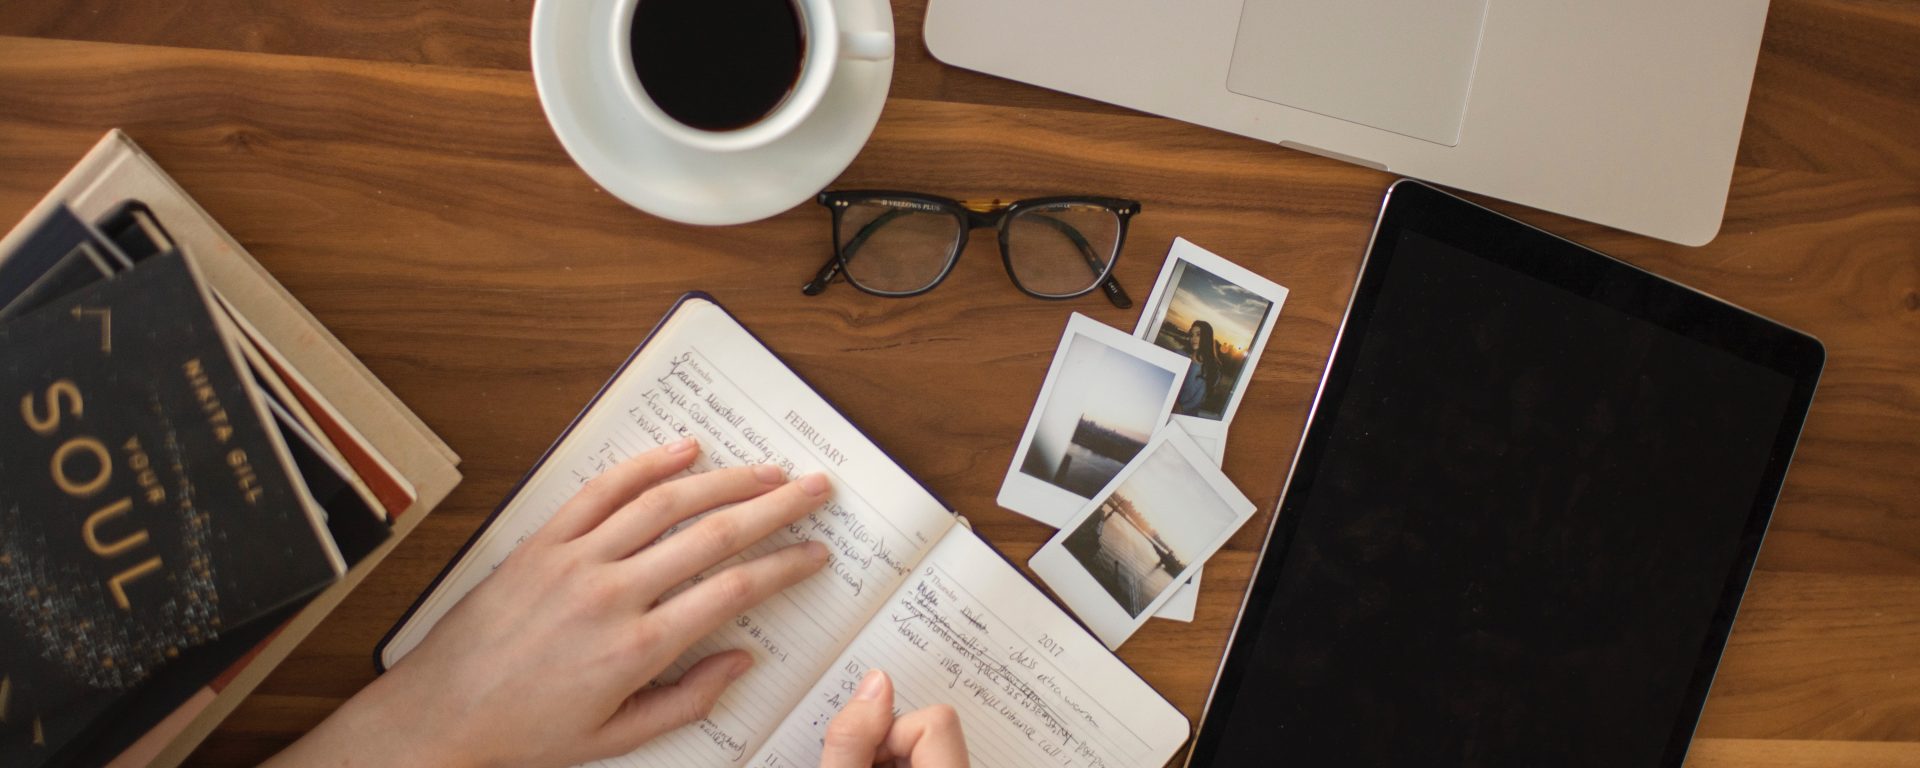 person holding ballpoint pen writing in a notebook with a cup of coffee, eye glasses, and a laptop on a desk.